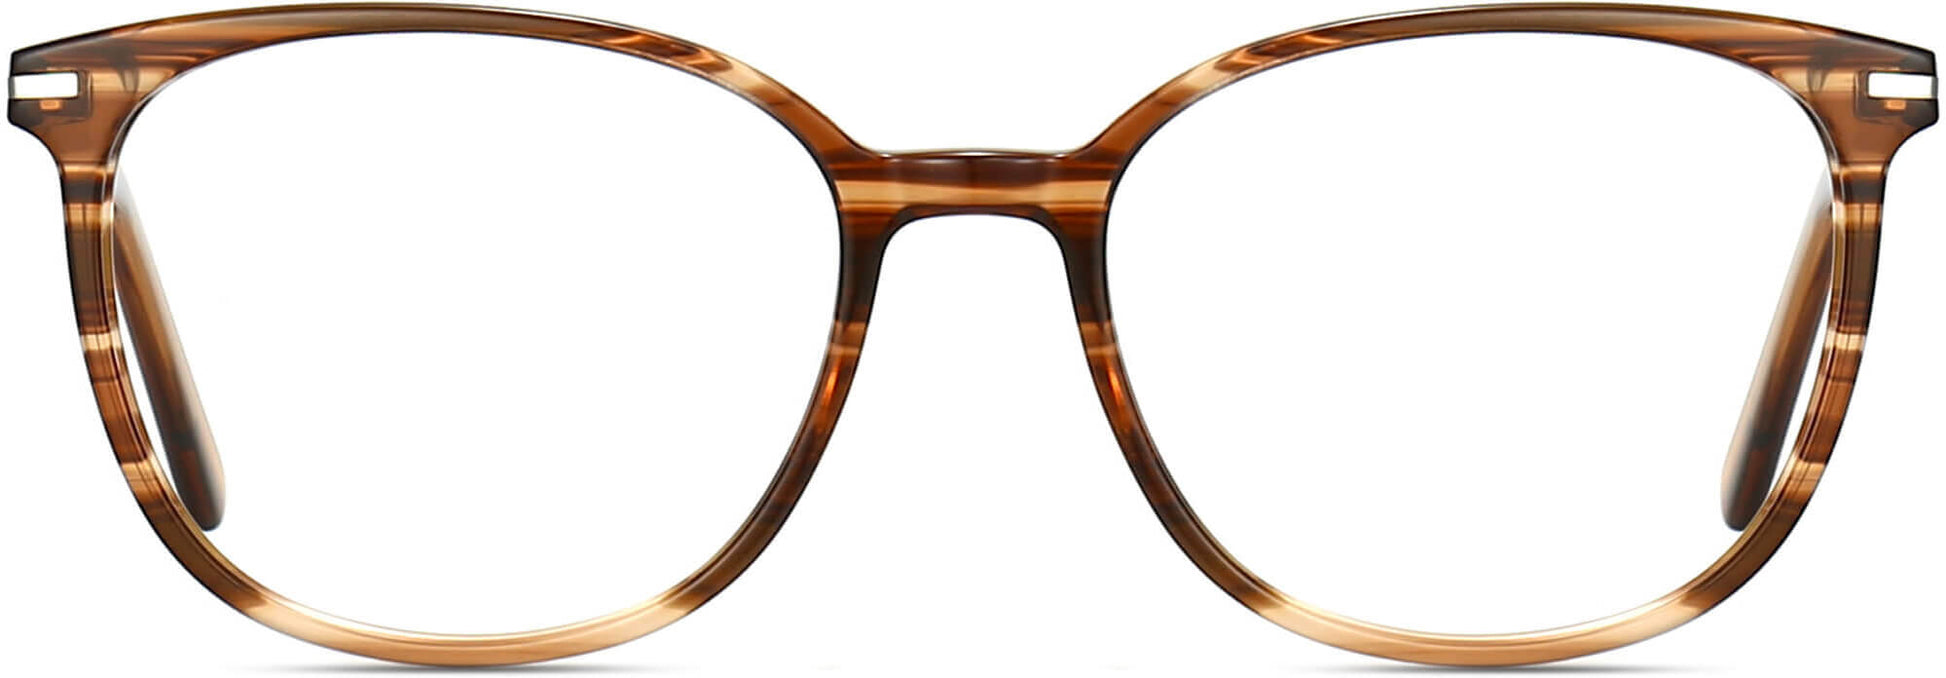 Knoxville Cateye Tortoise  Eyeglasses from ANRRI, front view